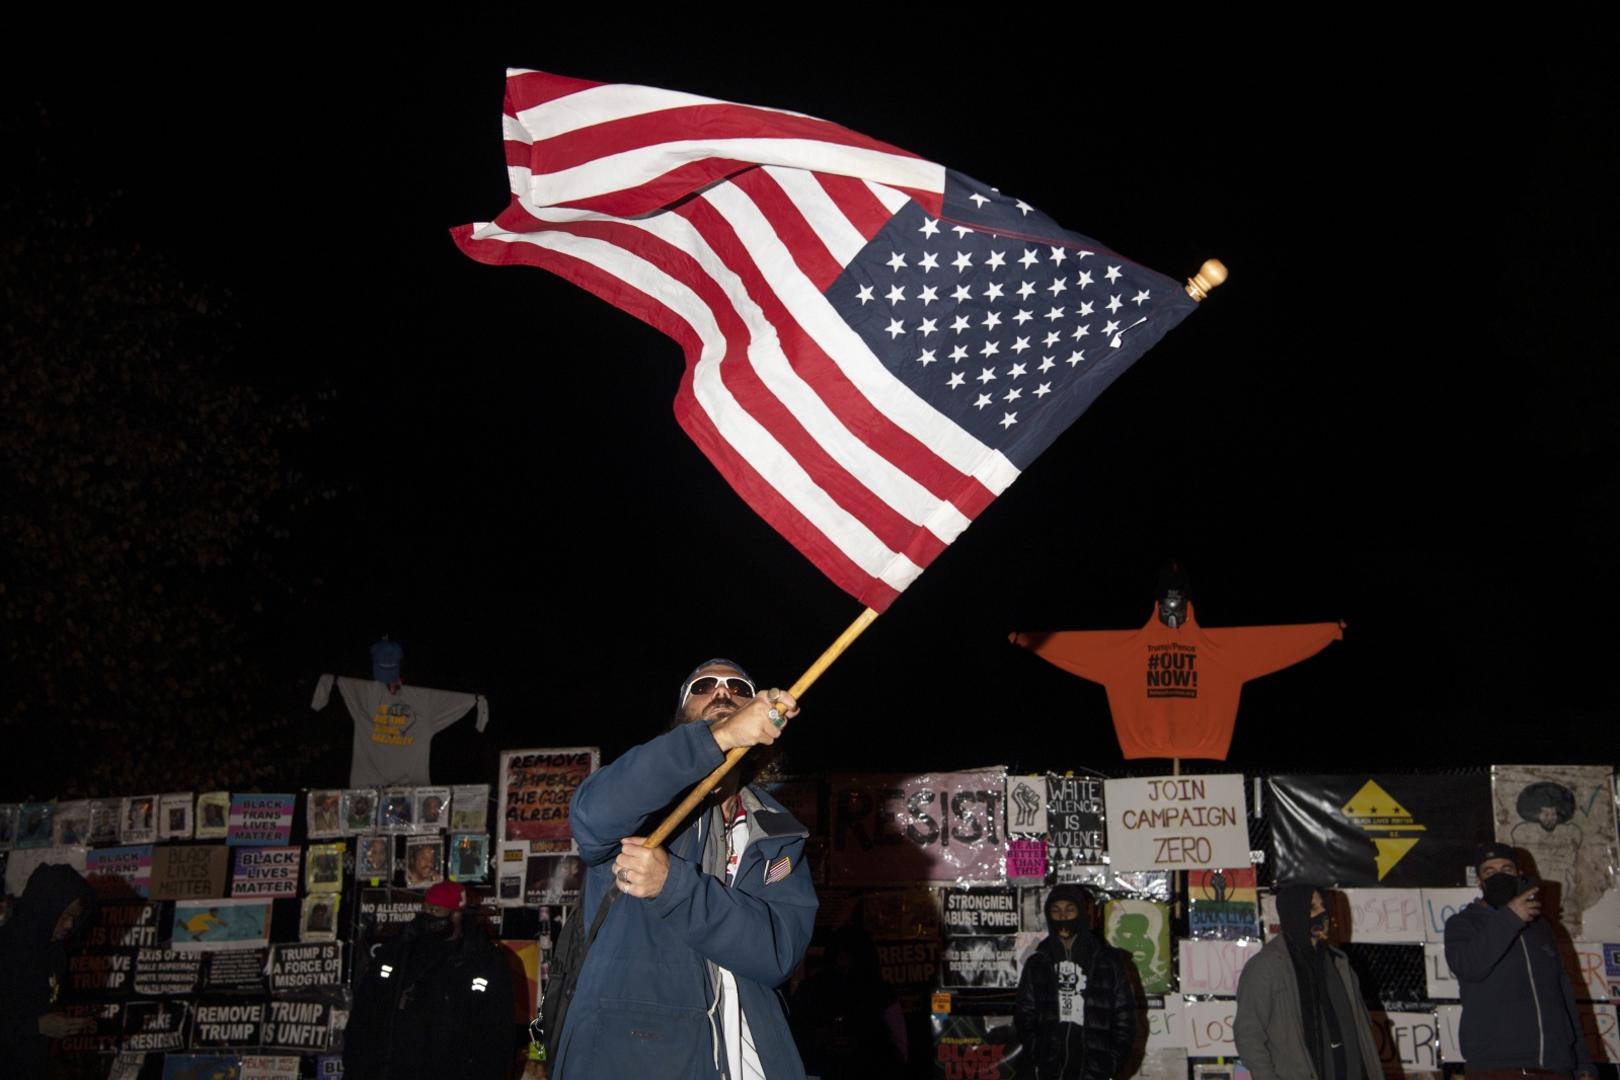 UNITED STATES - NOVEMBER 3: A man waves an American flag as people gather at Black Lives Matter Plaza during the 2020 Presidential election in Washington on Tuesday, Nov. 3, 2020. (Photo by Caroline Brehman/CQ Roll Call) Photo via Newscom Newscom/PIXSELL